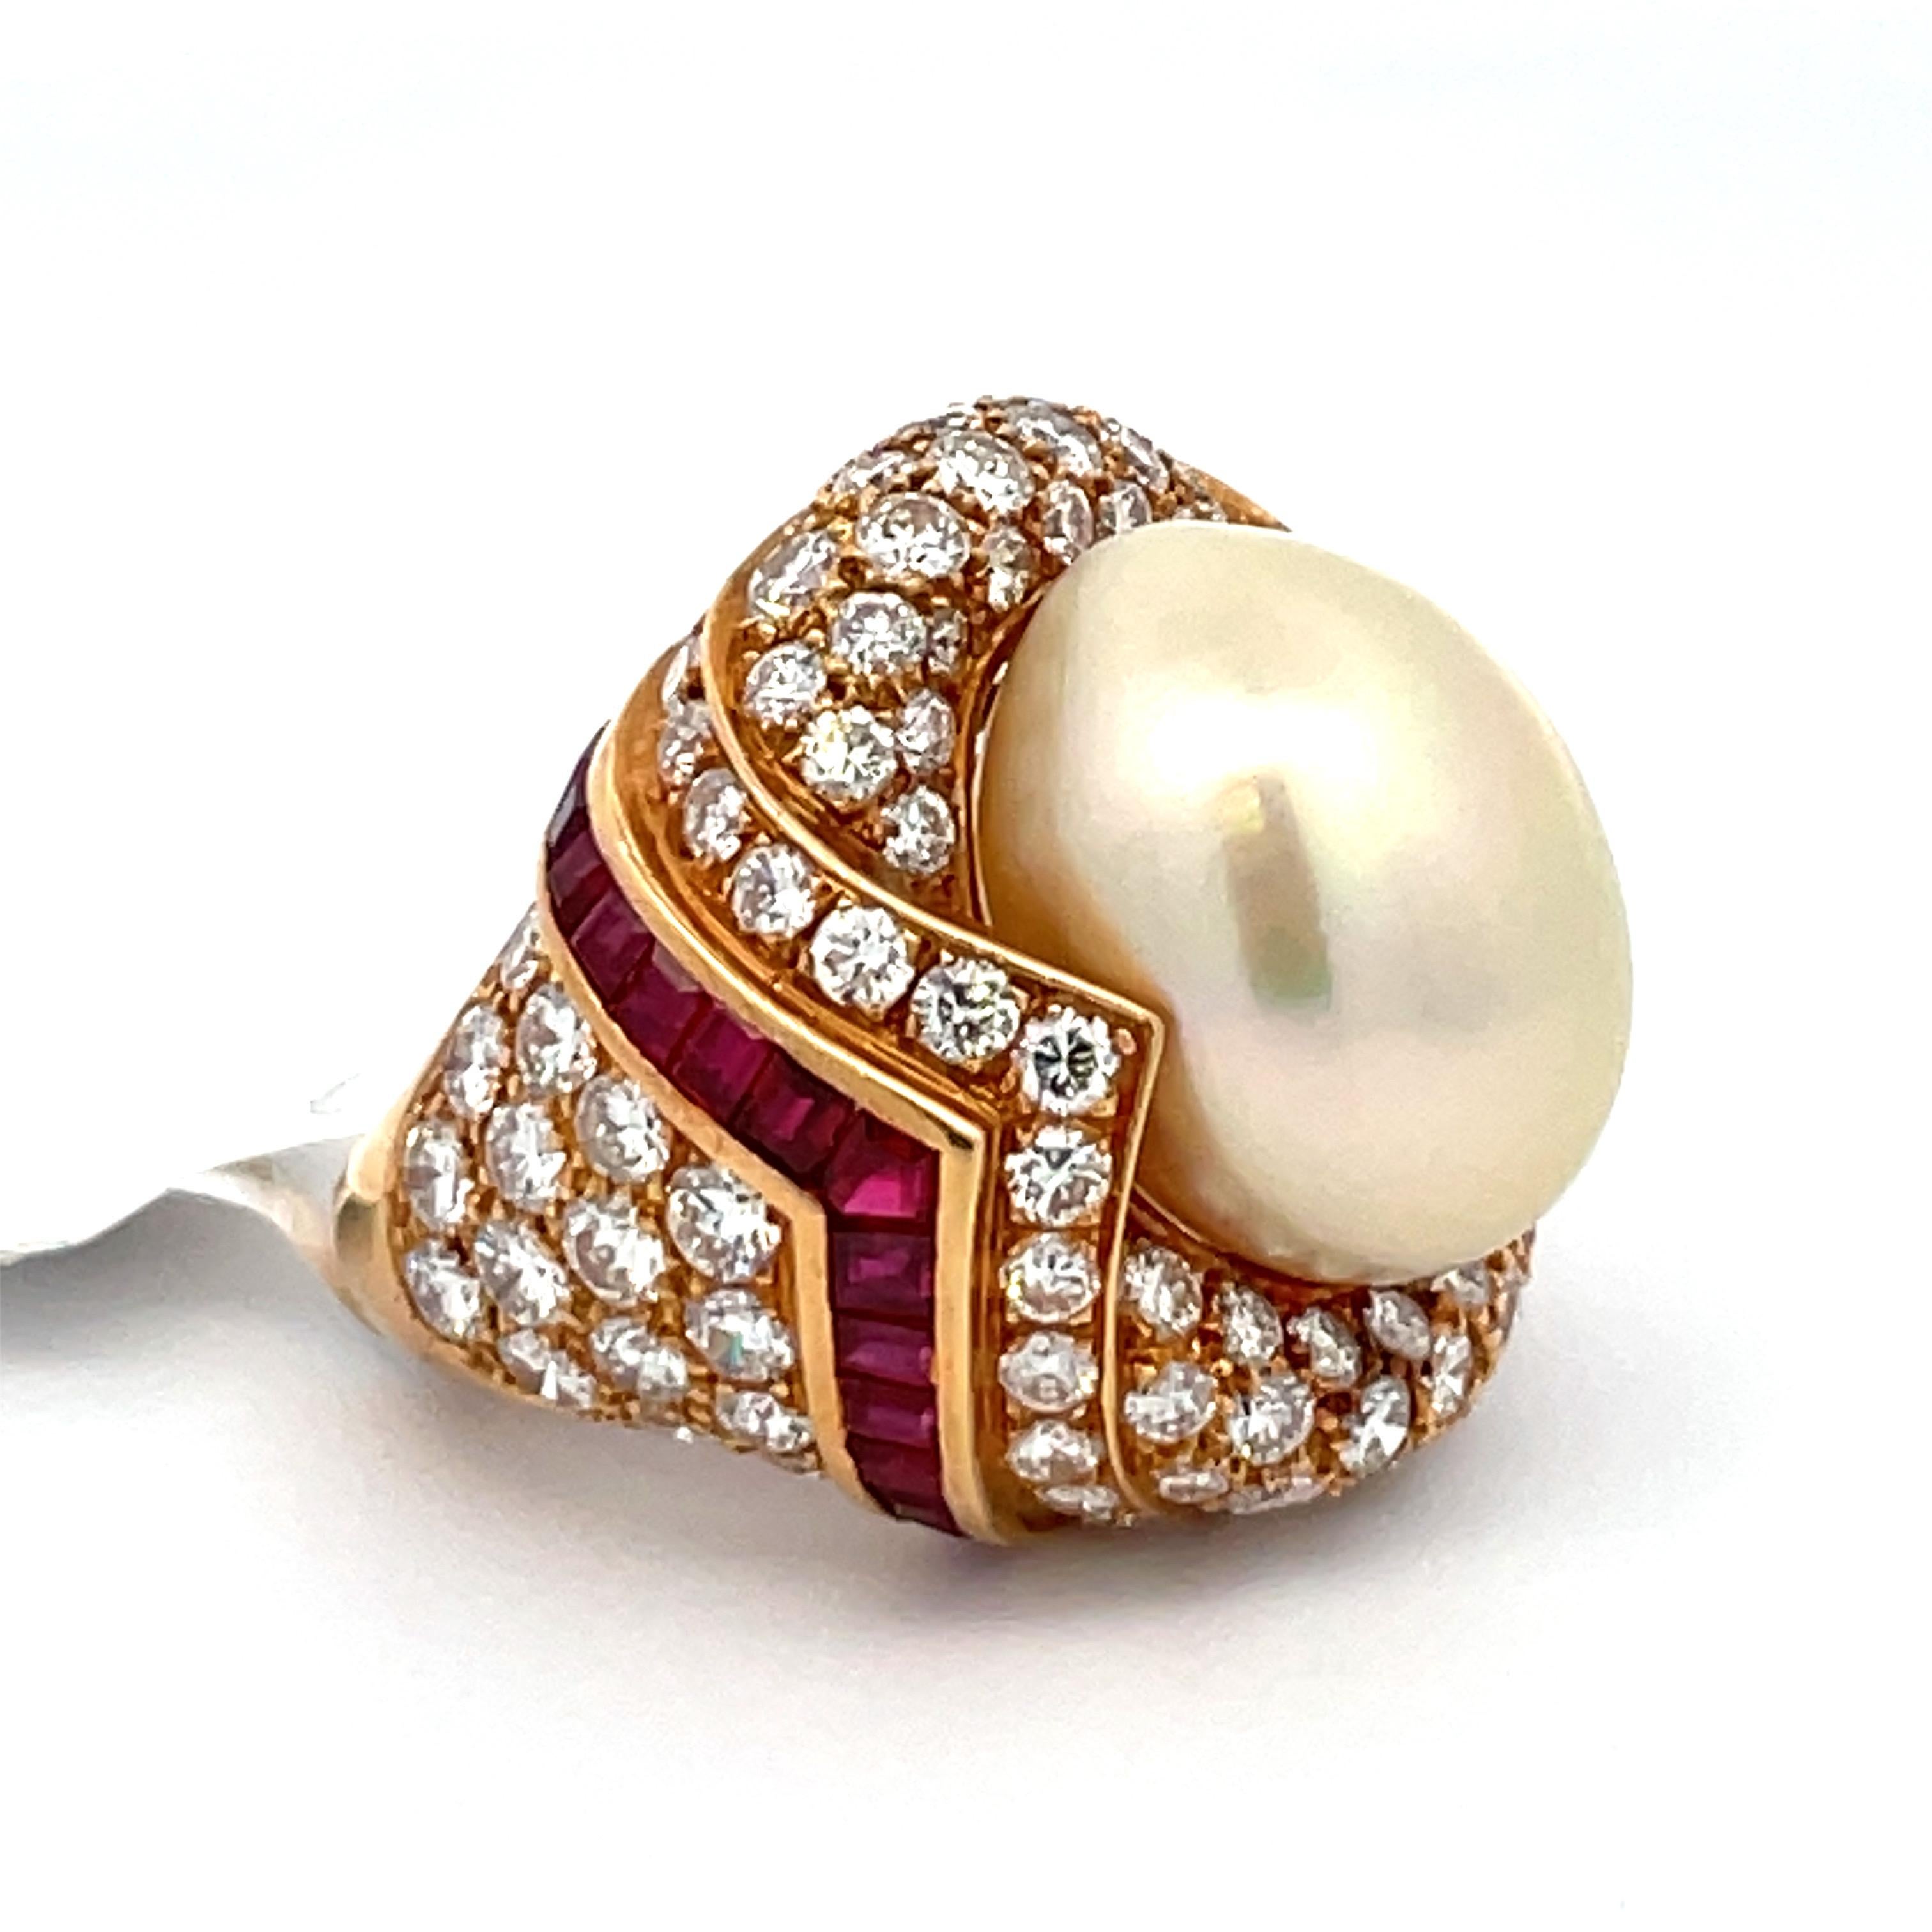 Mauboussin Paris GIA Certified South Sea Pearl Diamond Ruby Dome Cocktail Ring  1